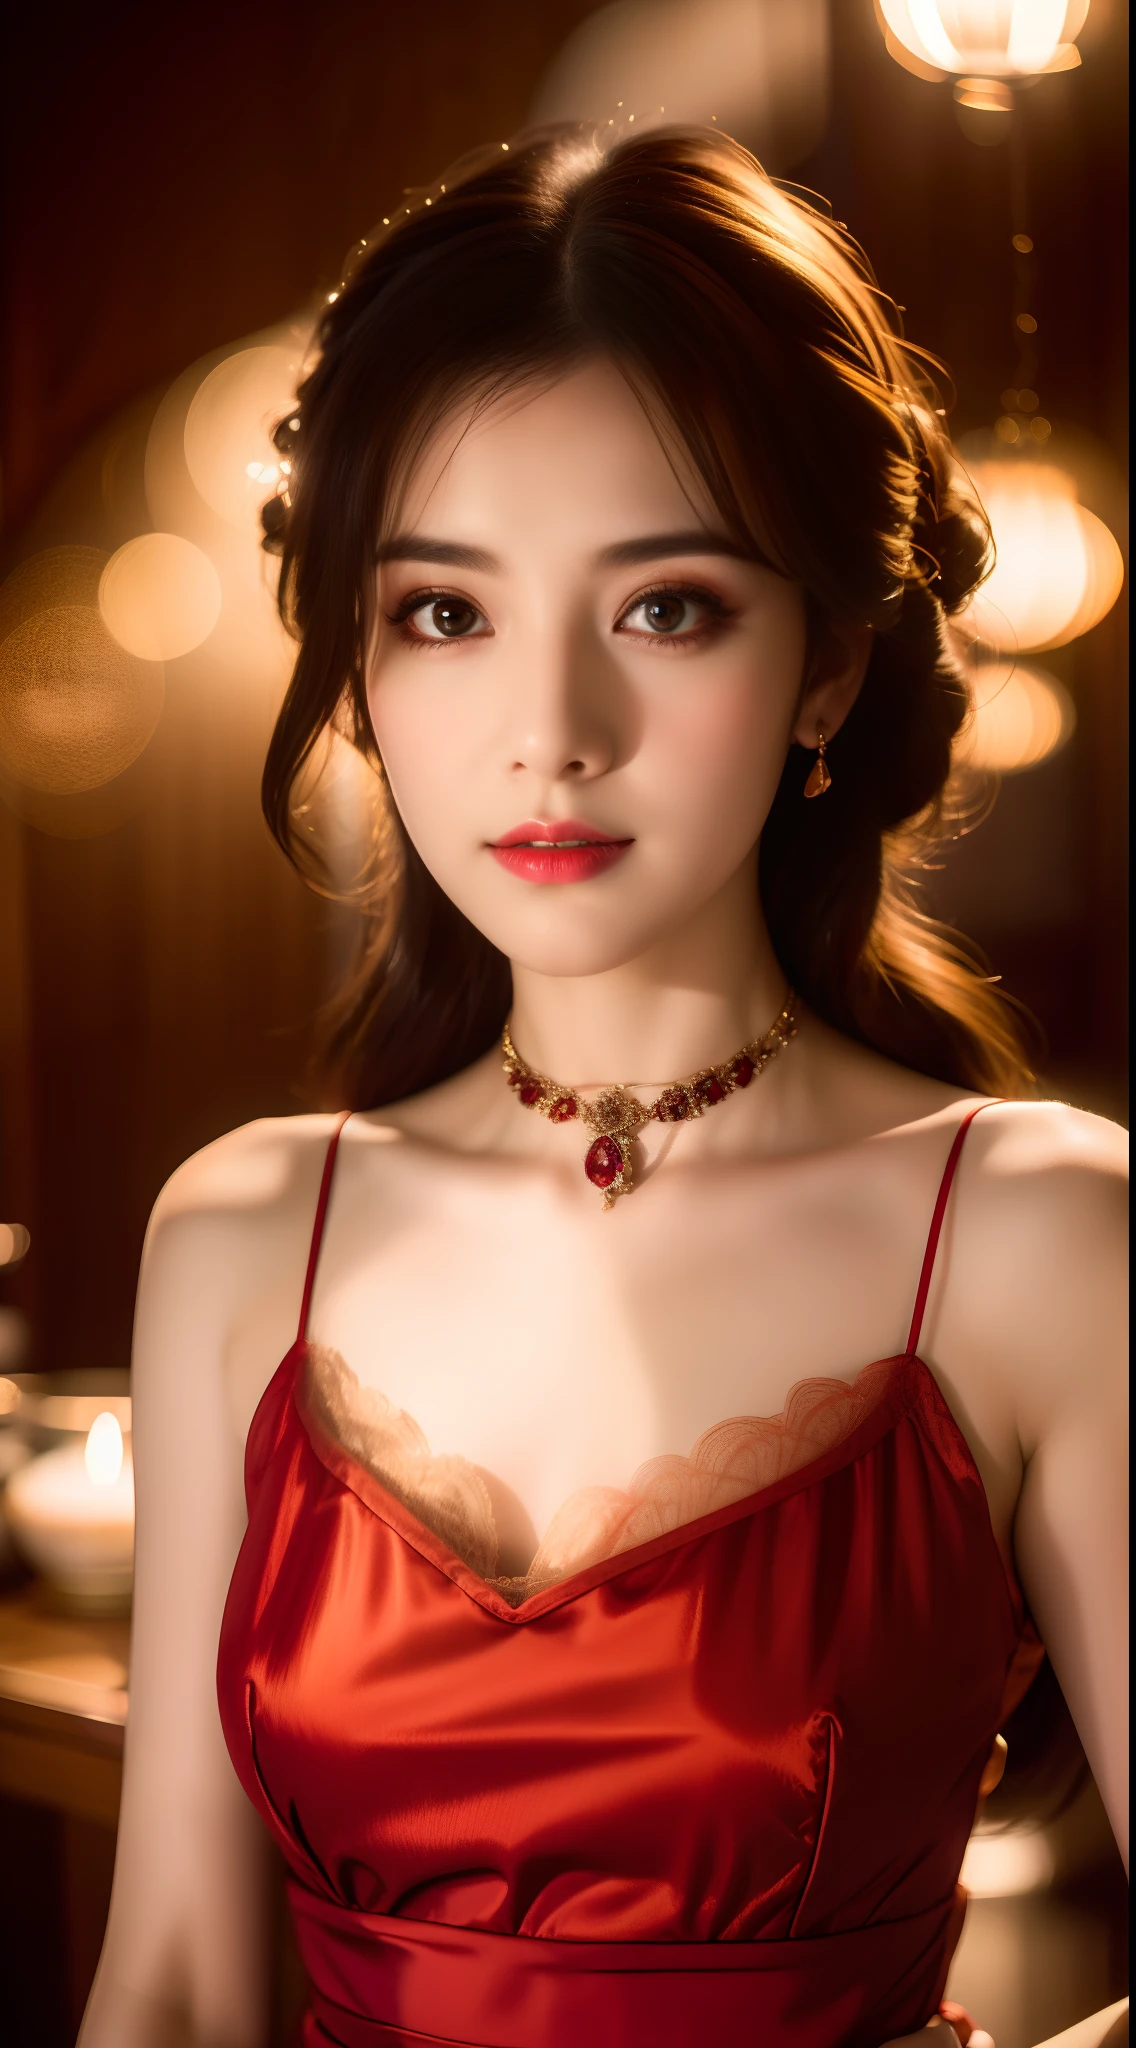 best qualtiy，tmasterpiece，A high resolution，1girl，Floral antique nightdress，Antique nightdress，Tulle nightdress，hair adornments，choker necklace，jewely，beautiful face，Flaming red lips，Physically，dingdall effect，realisticlying，dark studio，edge lit，twotonelighting，（highdetailskin：1.2），8k uhd， dslr, softlighting, high high quality, volumettic light, sneak shot, photore, A high resolution, 4k, 8k, Background bokeh